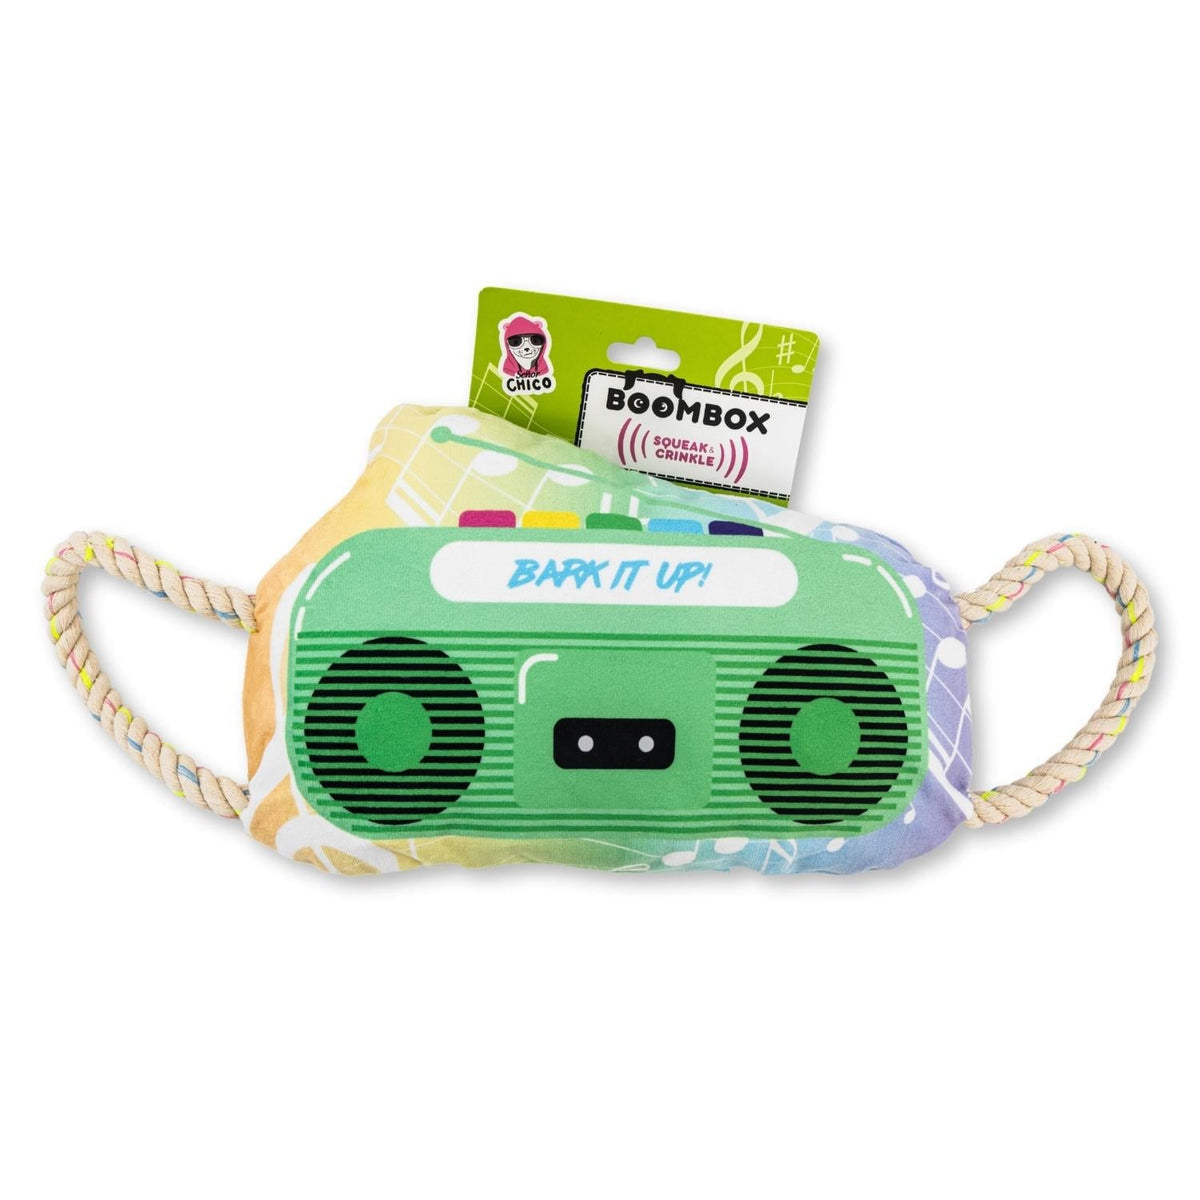 Retro Boombox Plush Dog Toy with Crinkle and Squeak Features by American Pet Supplies